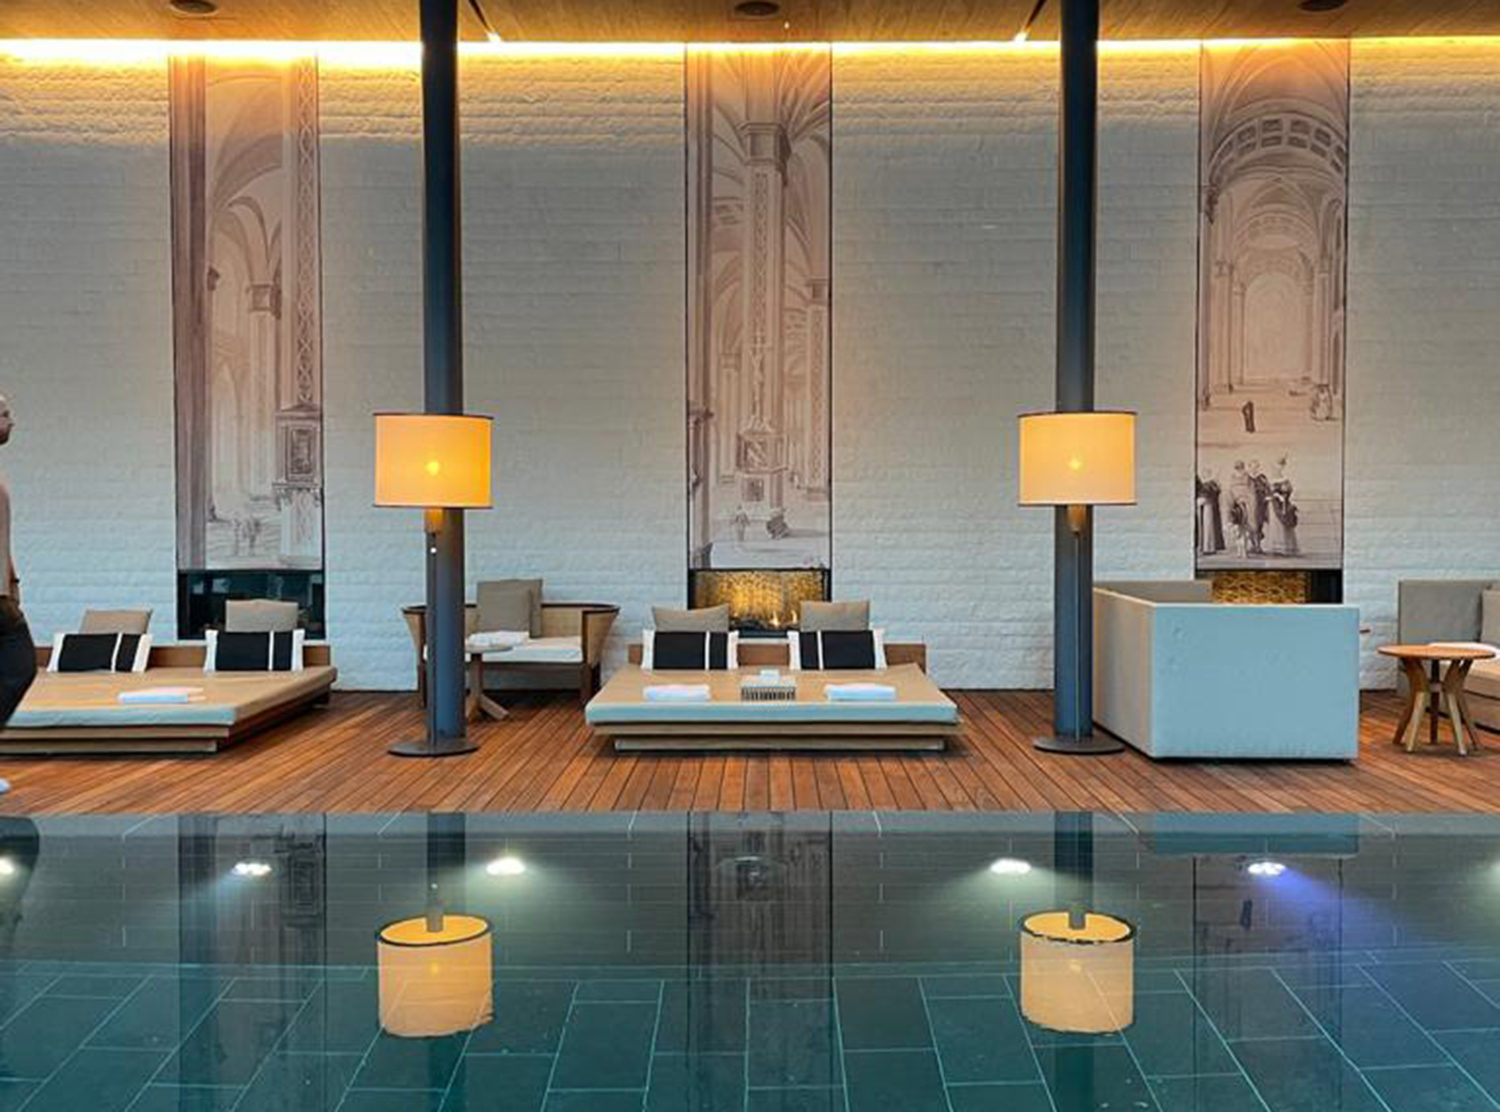 The Chedi Andermatt Pool of my dreams. Each of the lounge beds has fireplaces behind them, melting away all of your stress